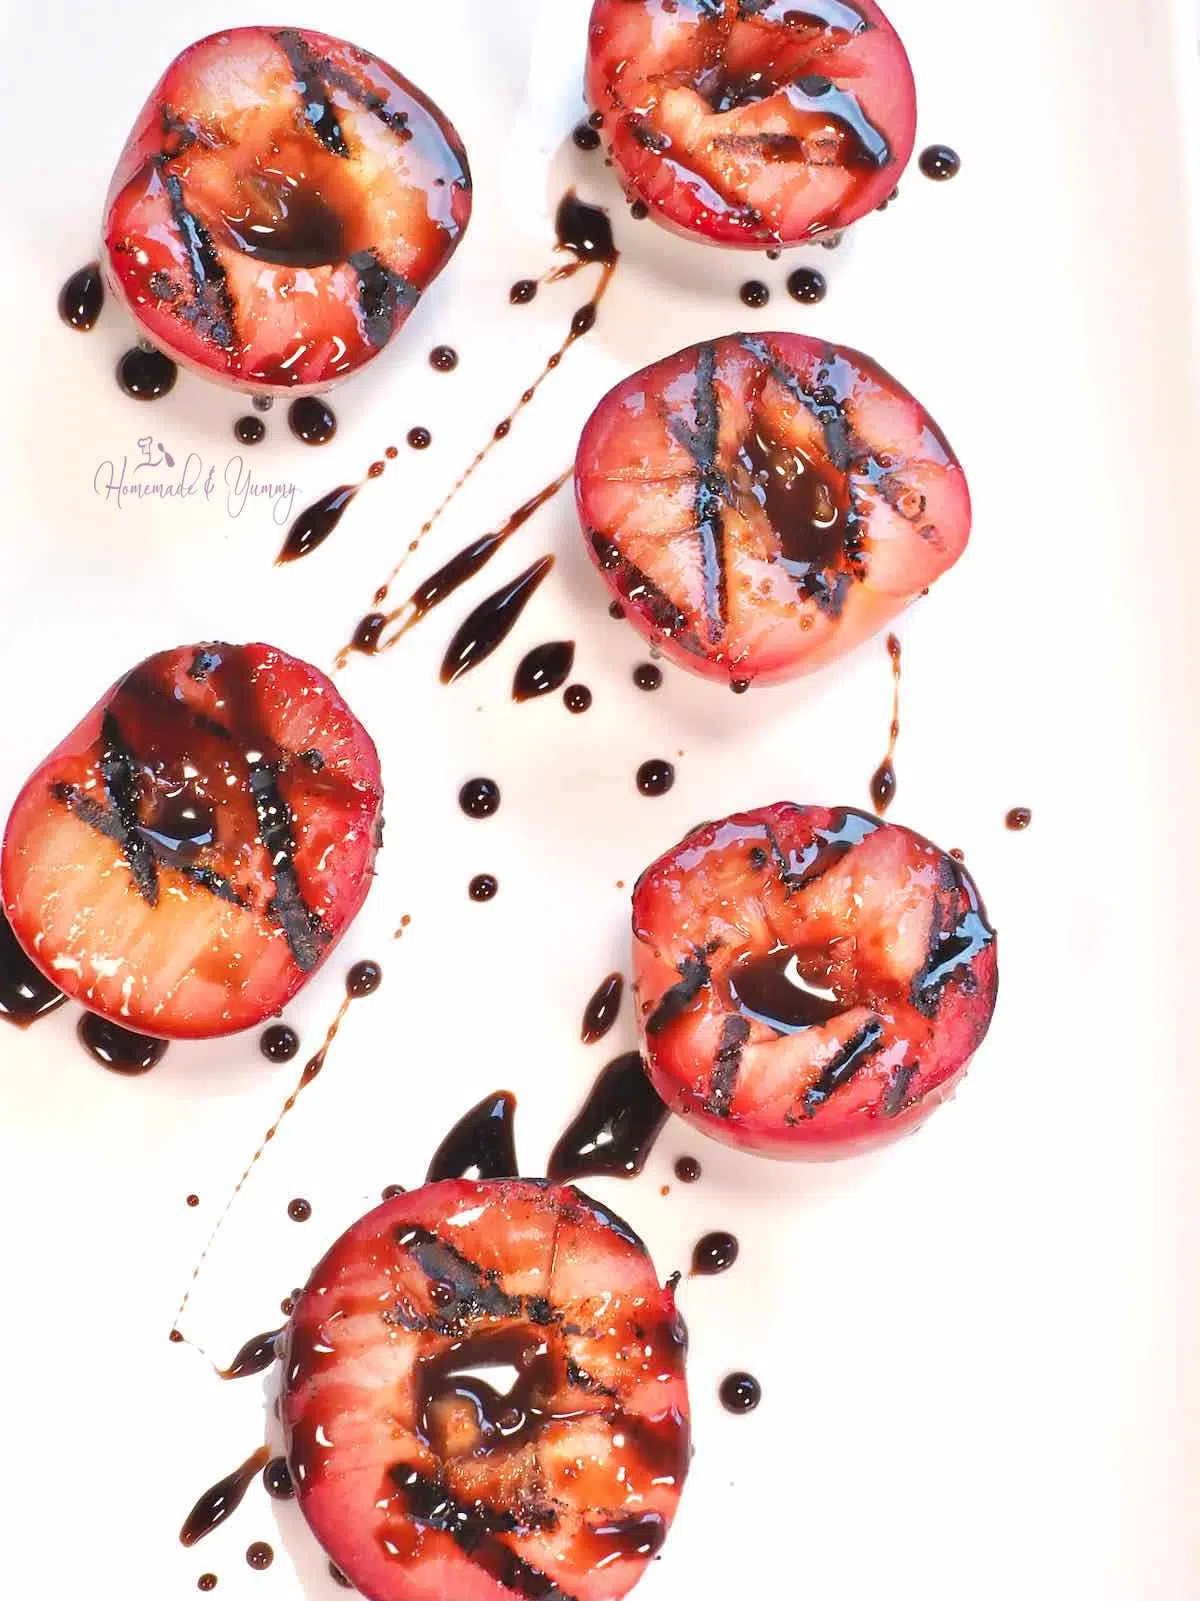 Grilled red plums on a plate with a chocolate honey glaze.